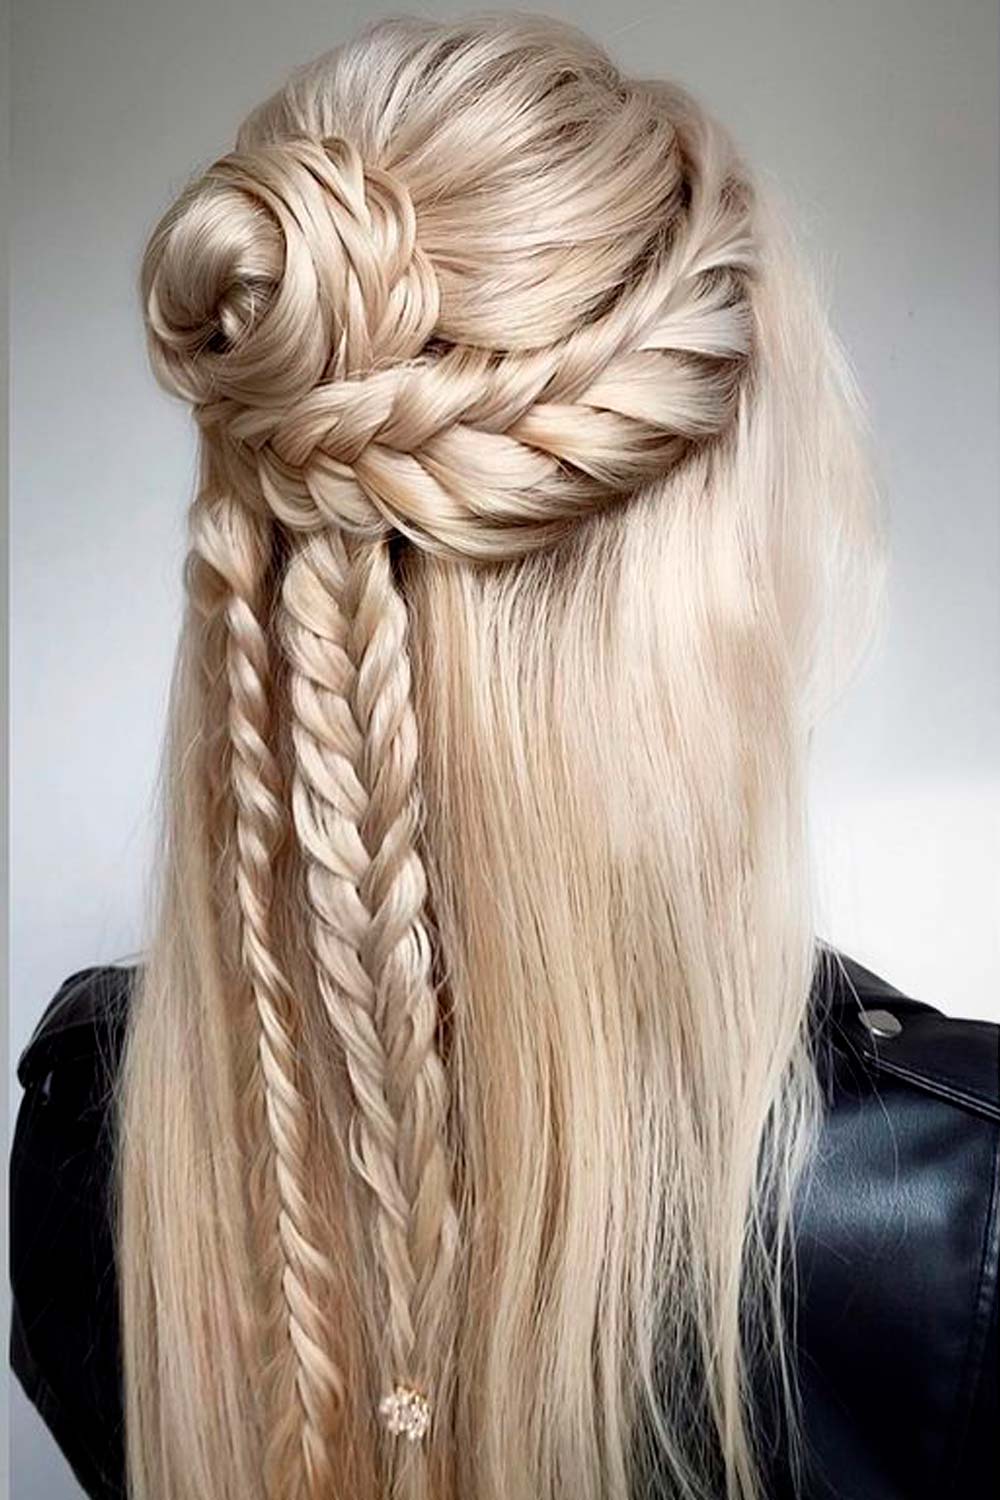 Braided Half Up Hairstyles For Christmas Party